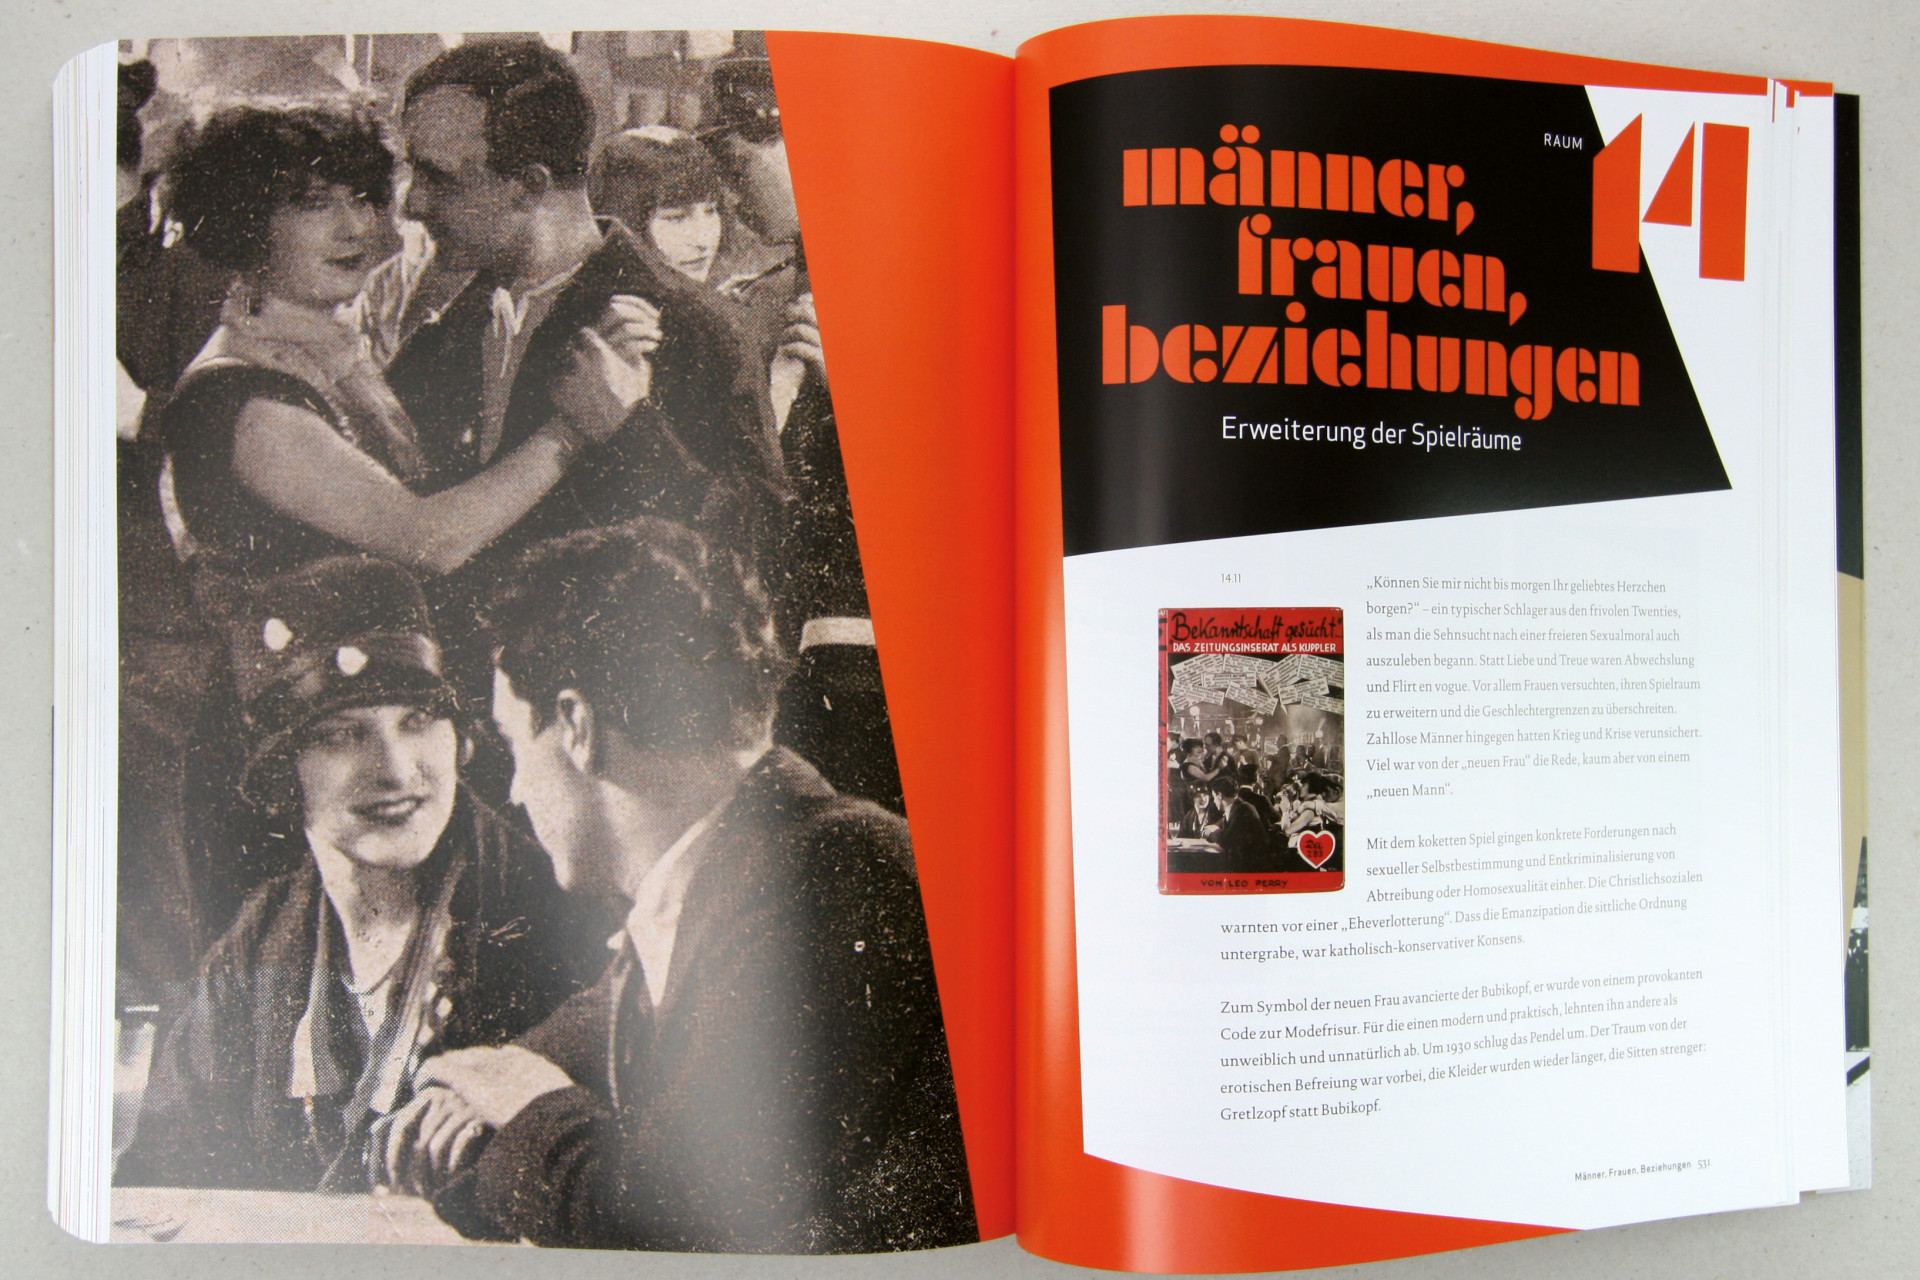 The exhibition catalog for "Battle for the City" inside, in which the typeface takes on a main design role for headings